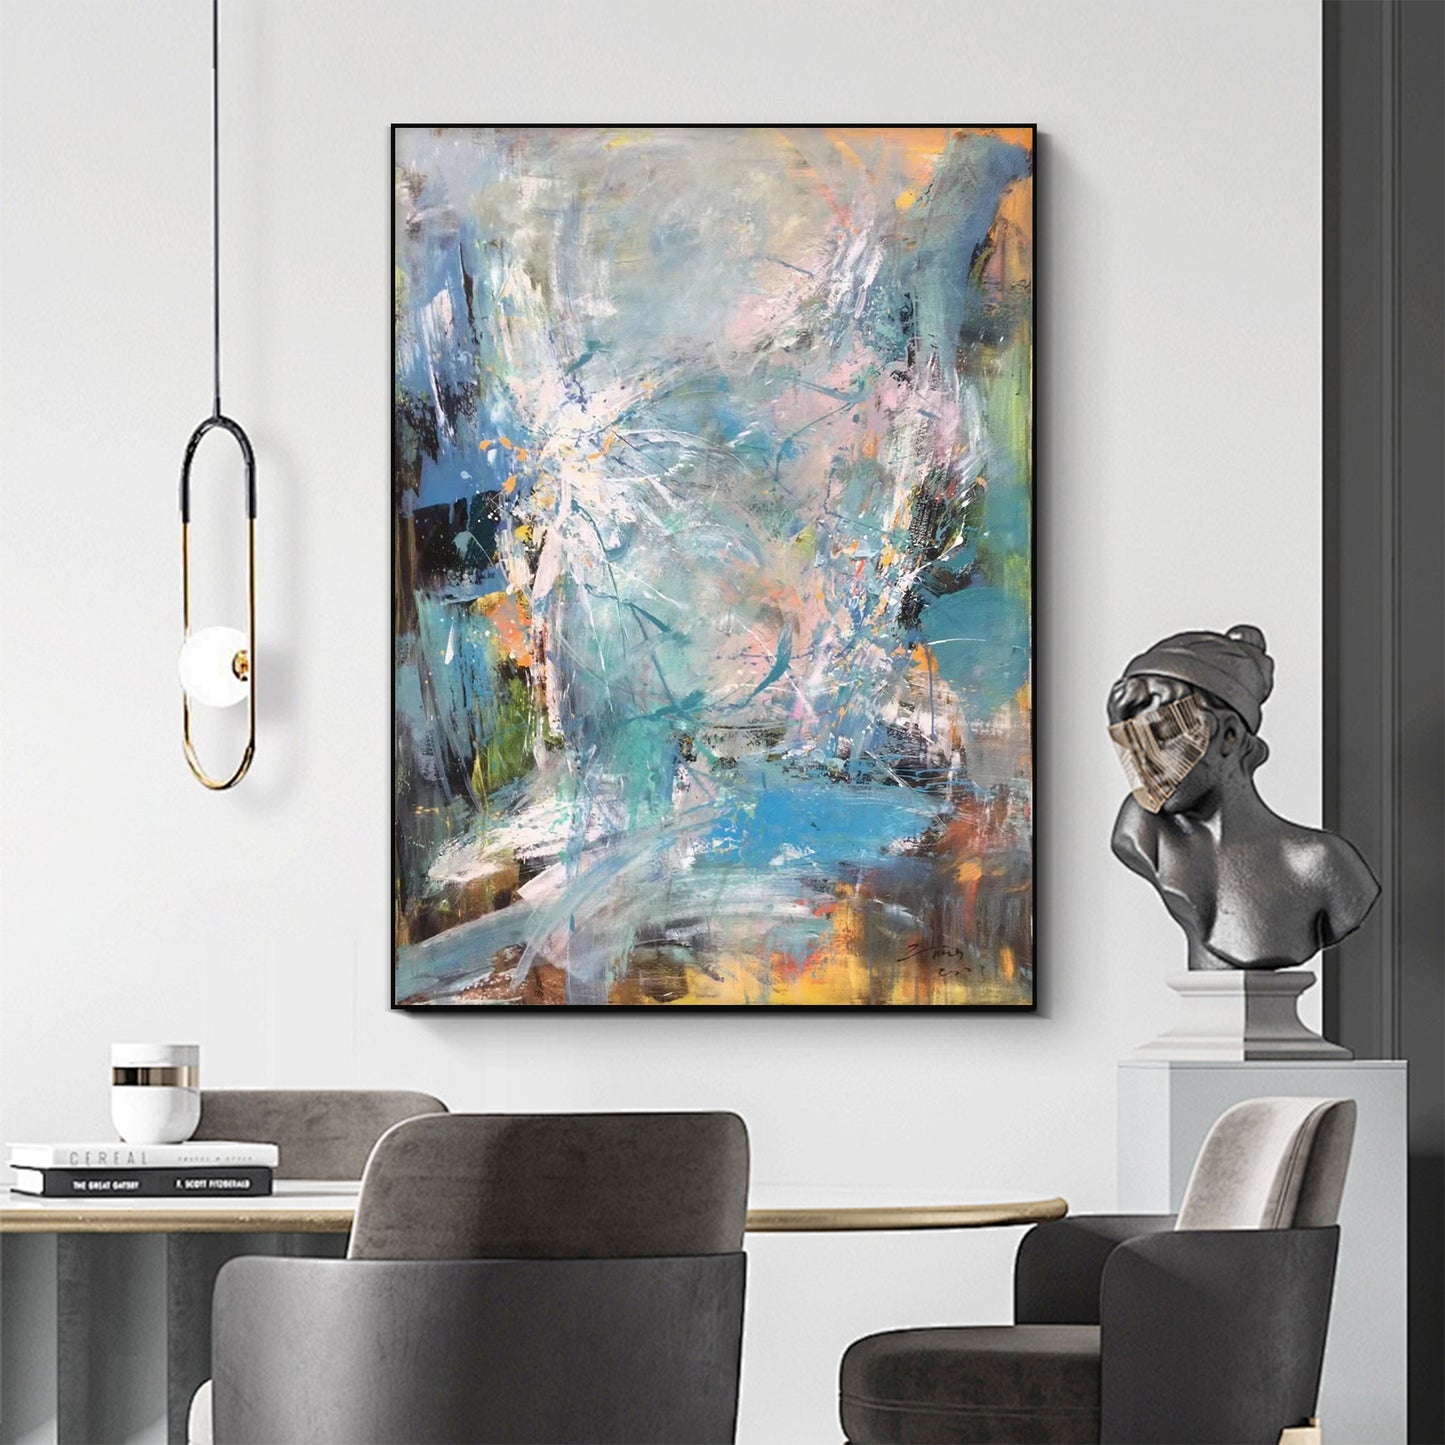 ABSTRACT PAINTING, GALAXY WORLD, HAND-PAINTED CANVAS